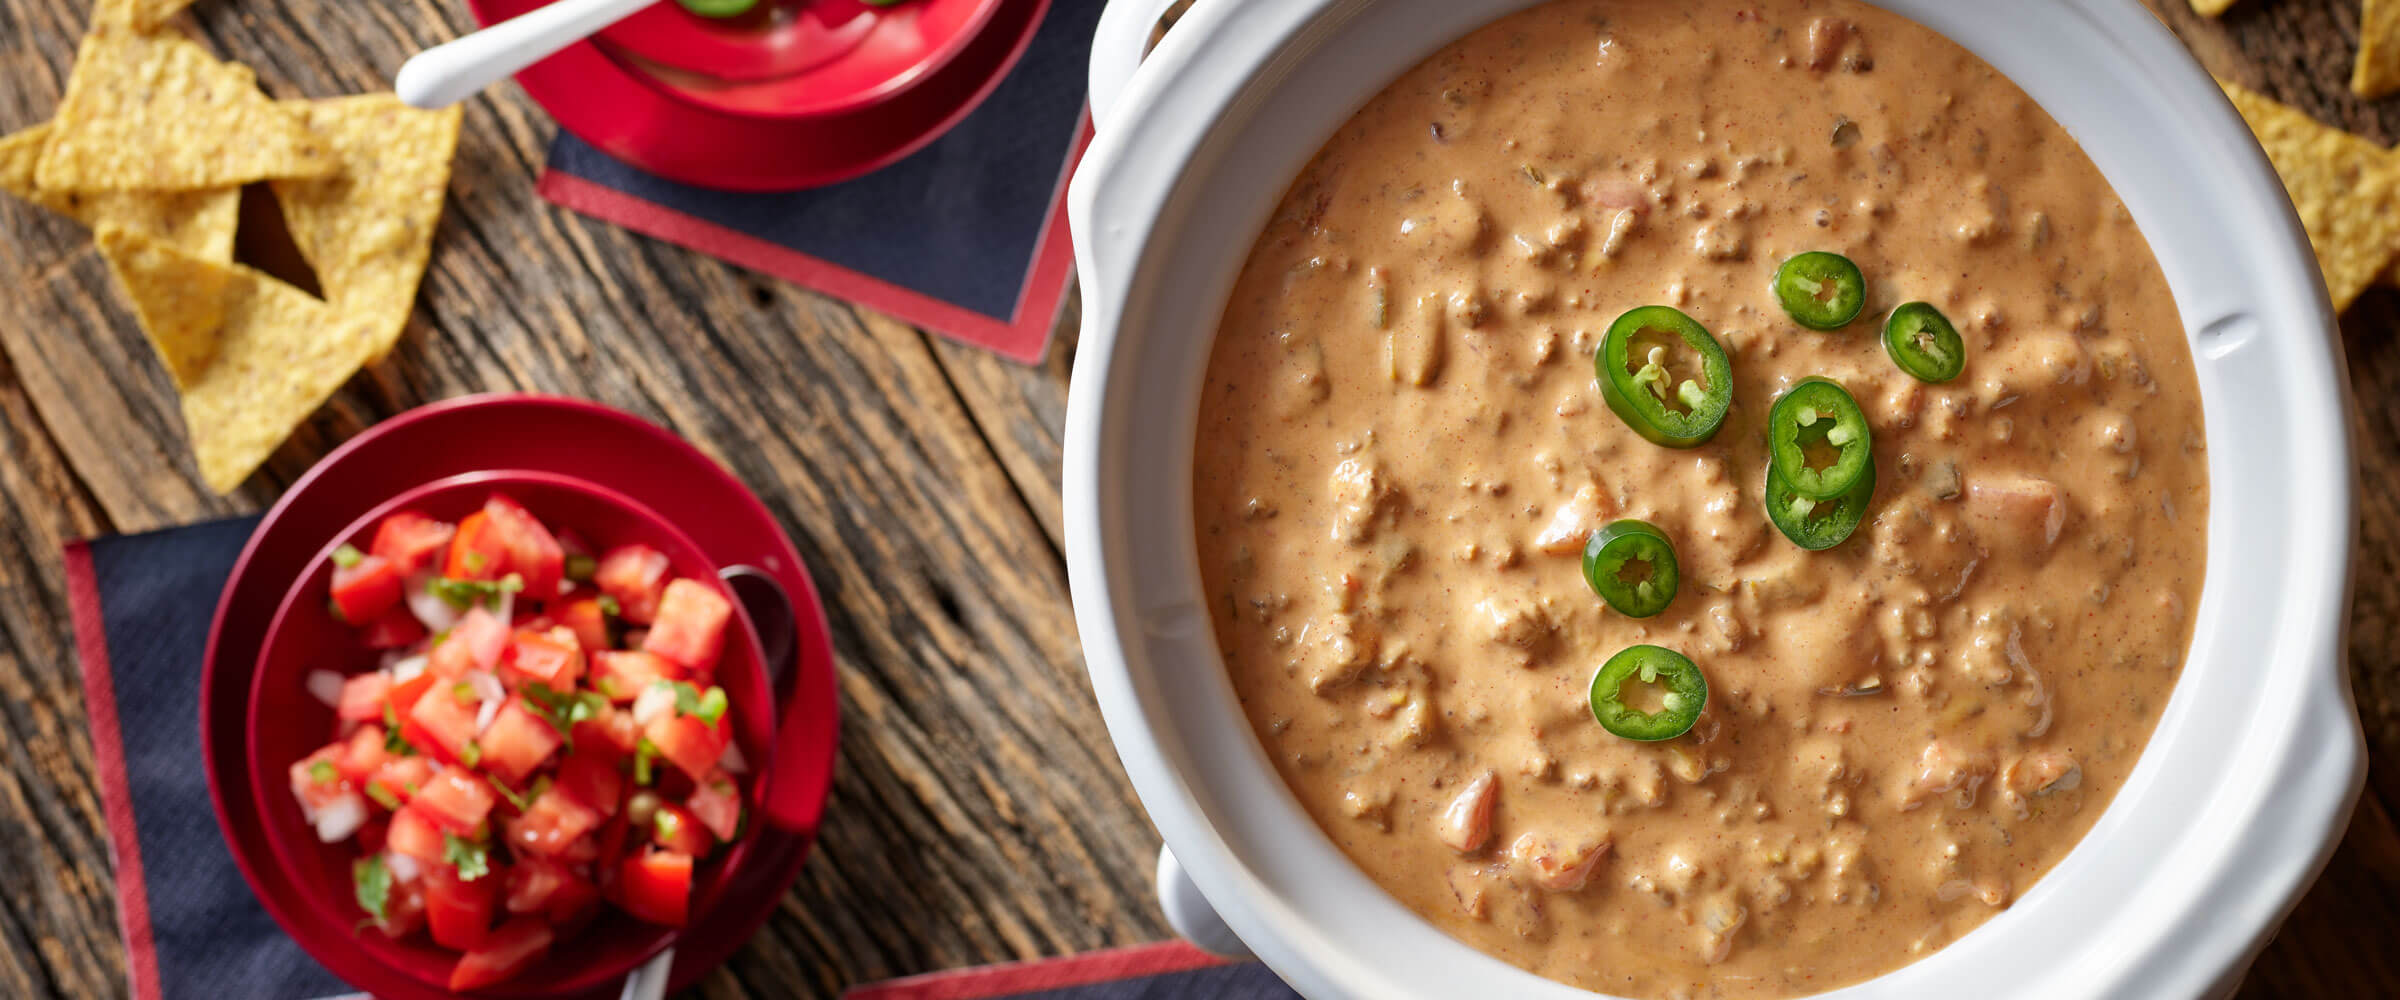 Slow Cooker Chili con Queso Dip topped with jalapeno in white dish with salsa on the side